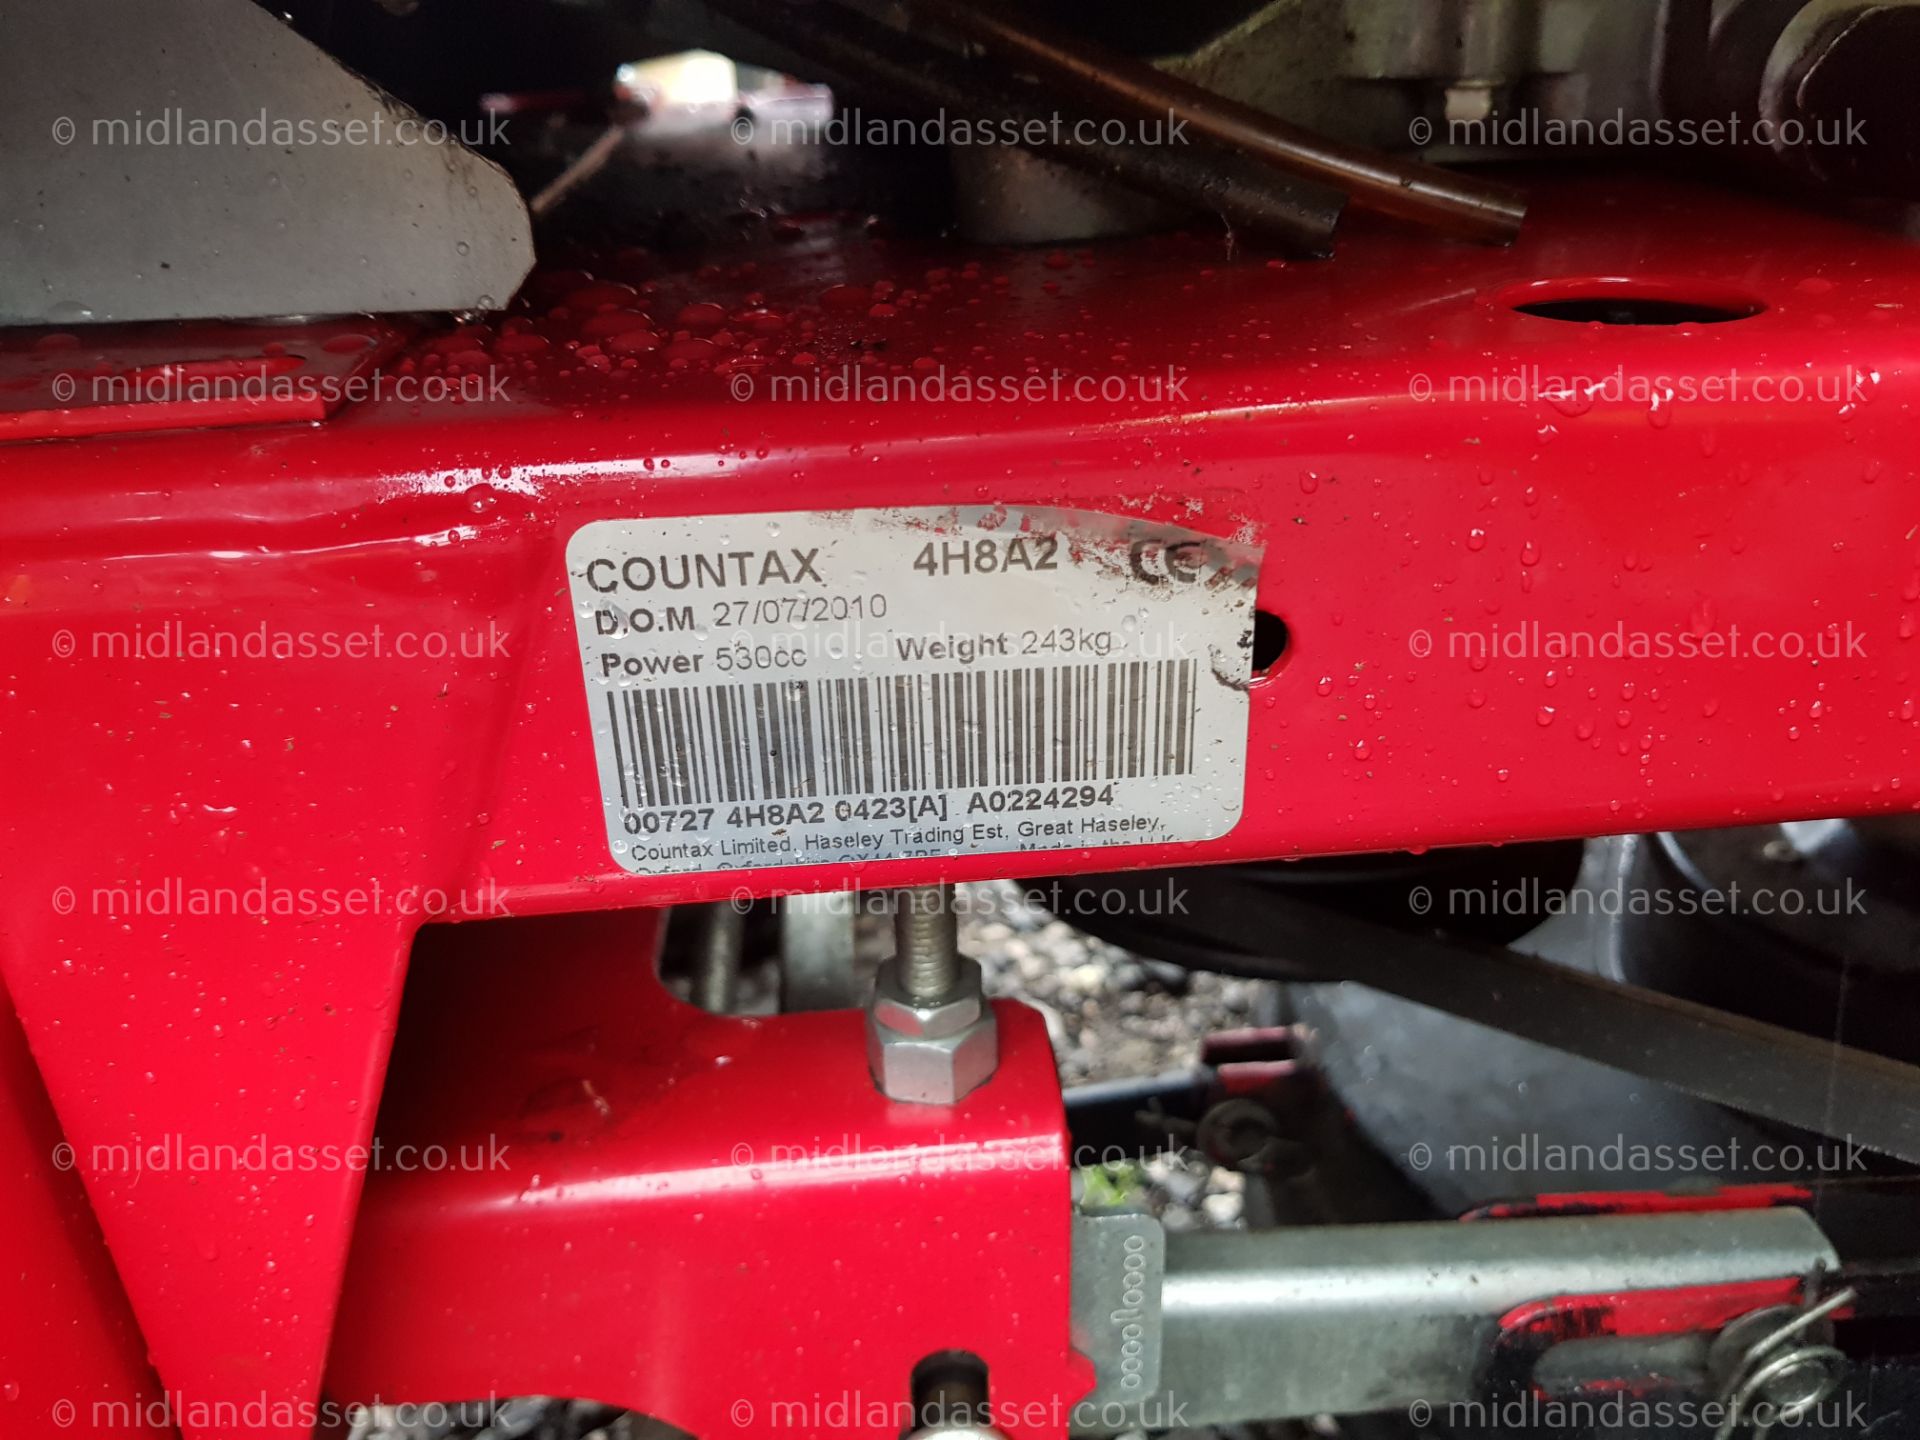 2010 COUNTAX C400H RIDE ON MOWER - Image 6 of 8